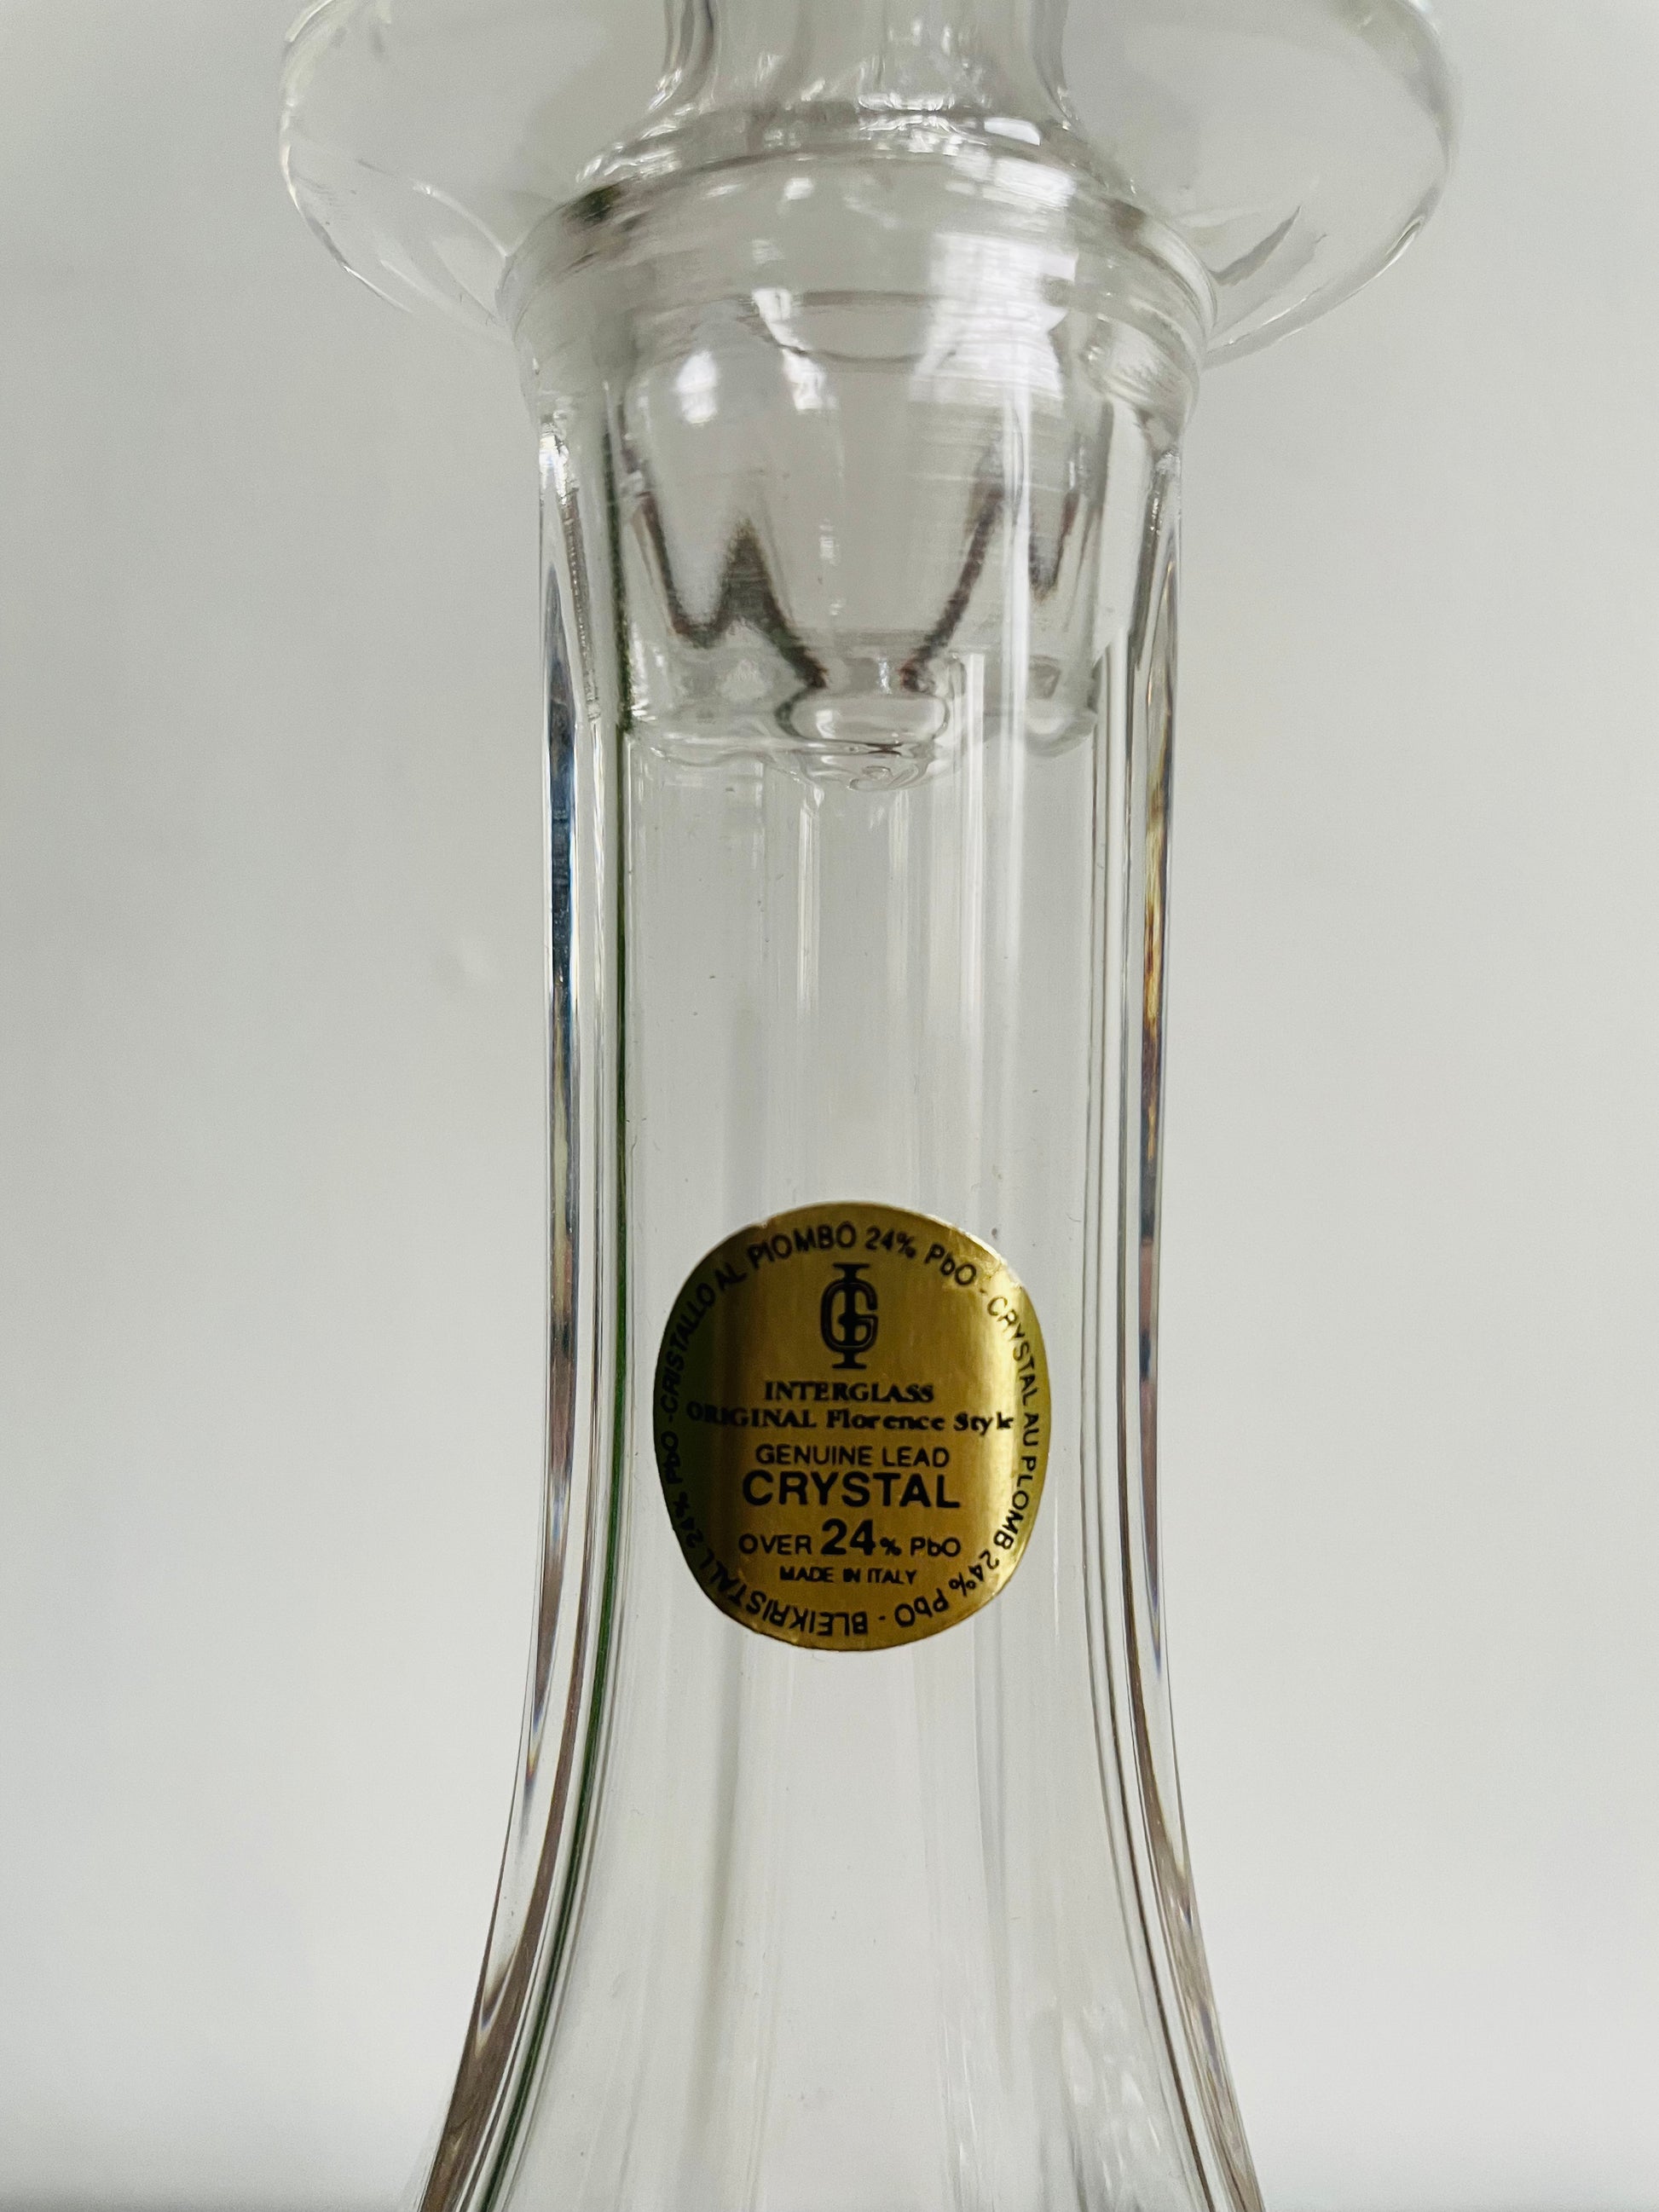 Genuine Lead Crystal Decanter with Gorgeous Details - Made in